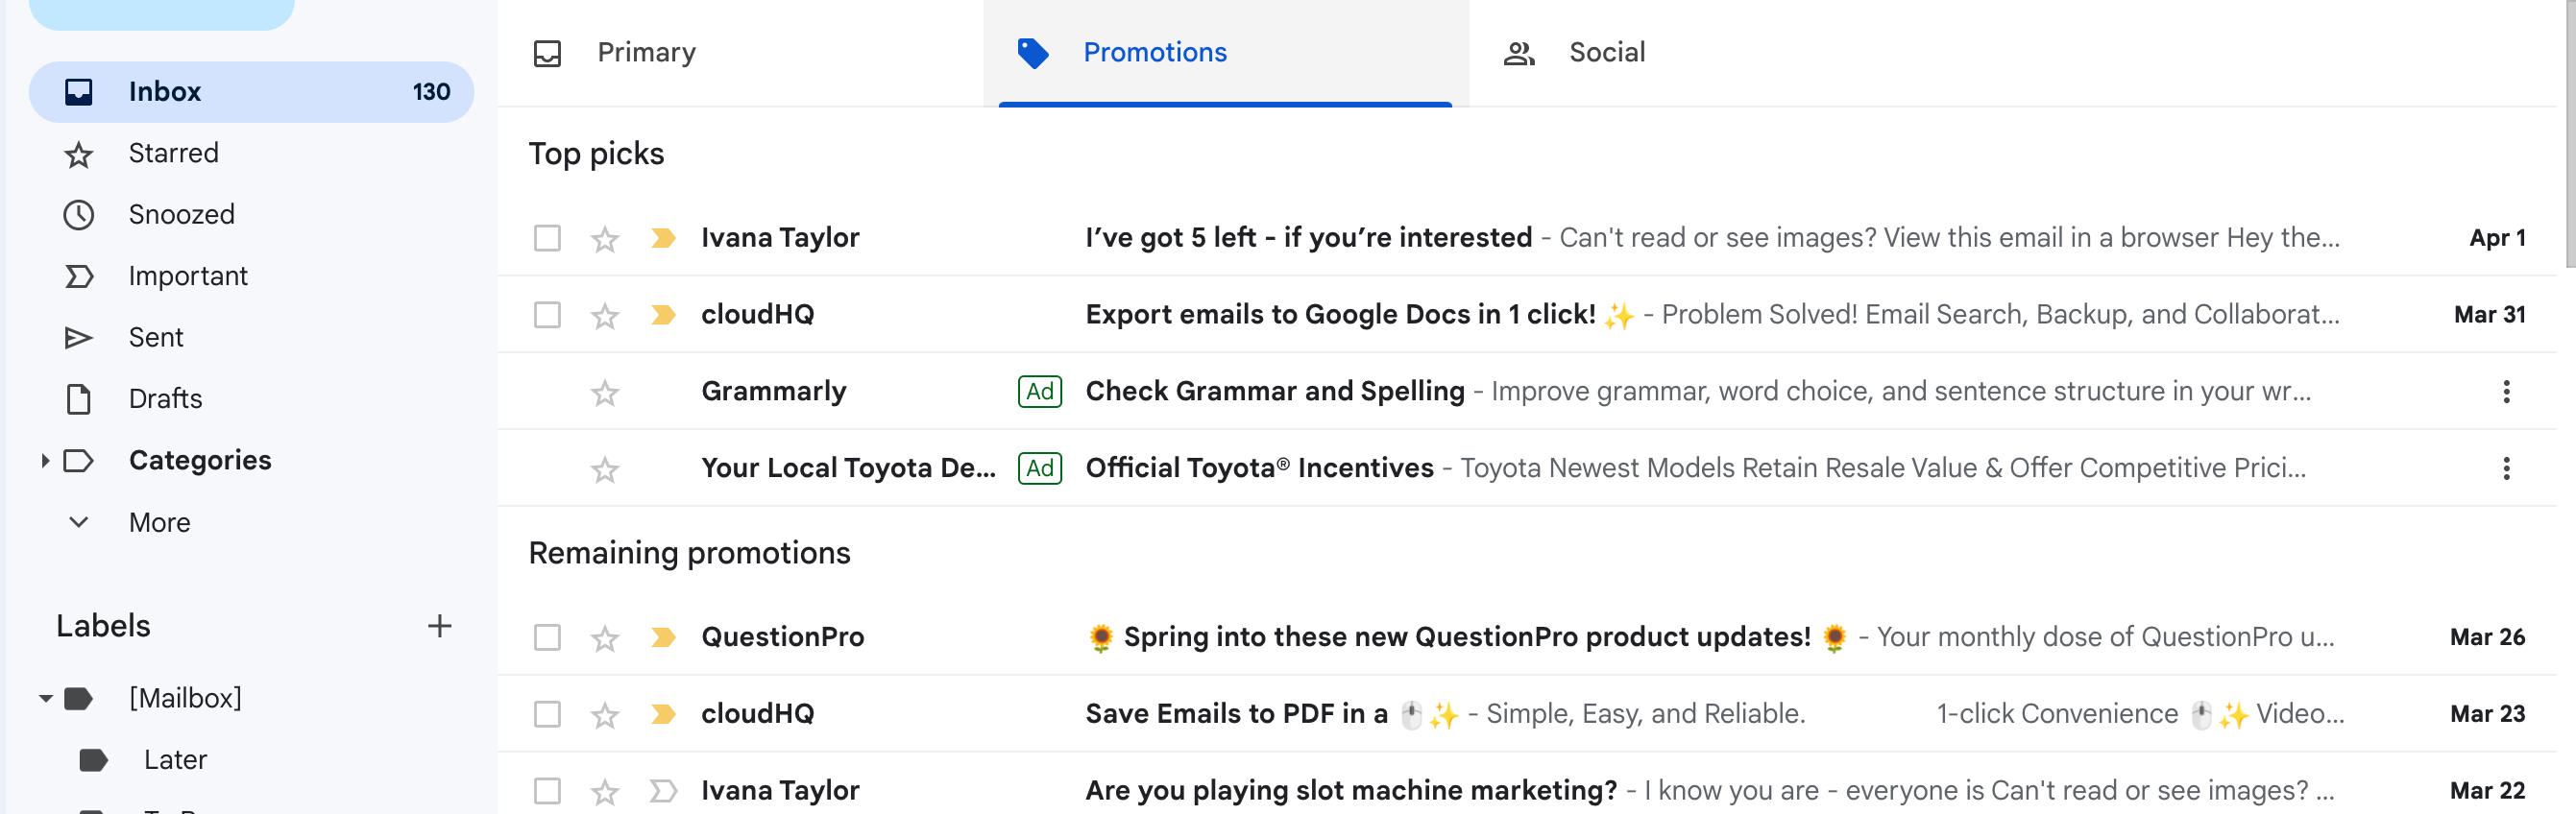 Illustration of Gmail ads appearing at the top of the Promotions or Social tabs in users' inboxes